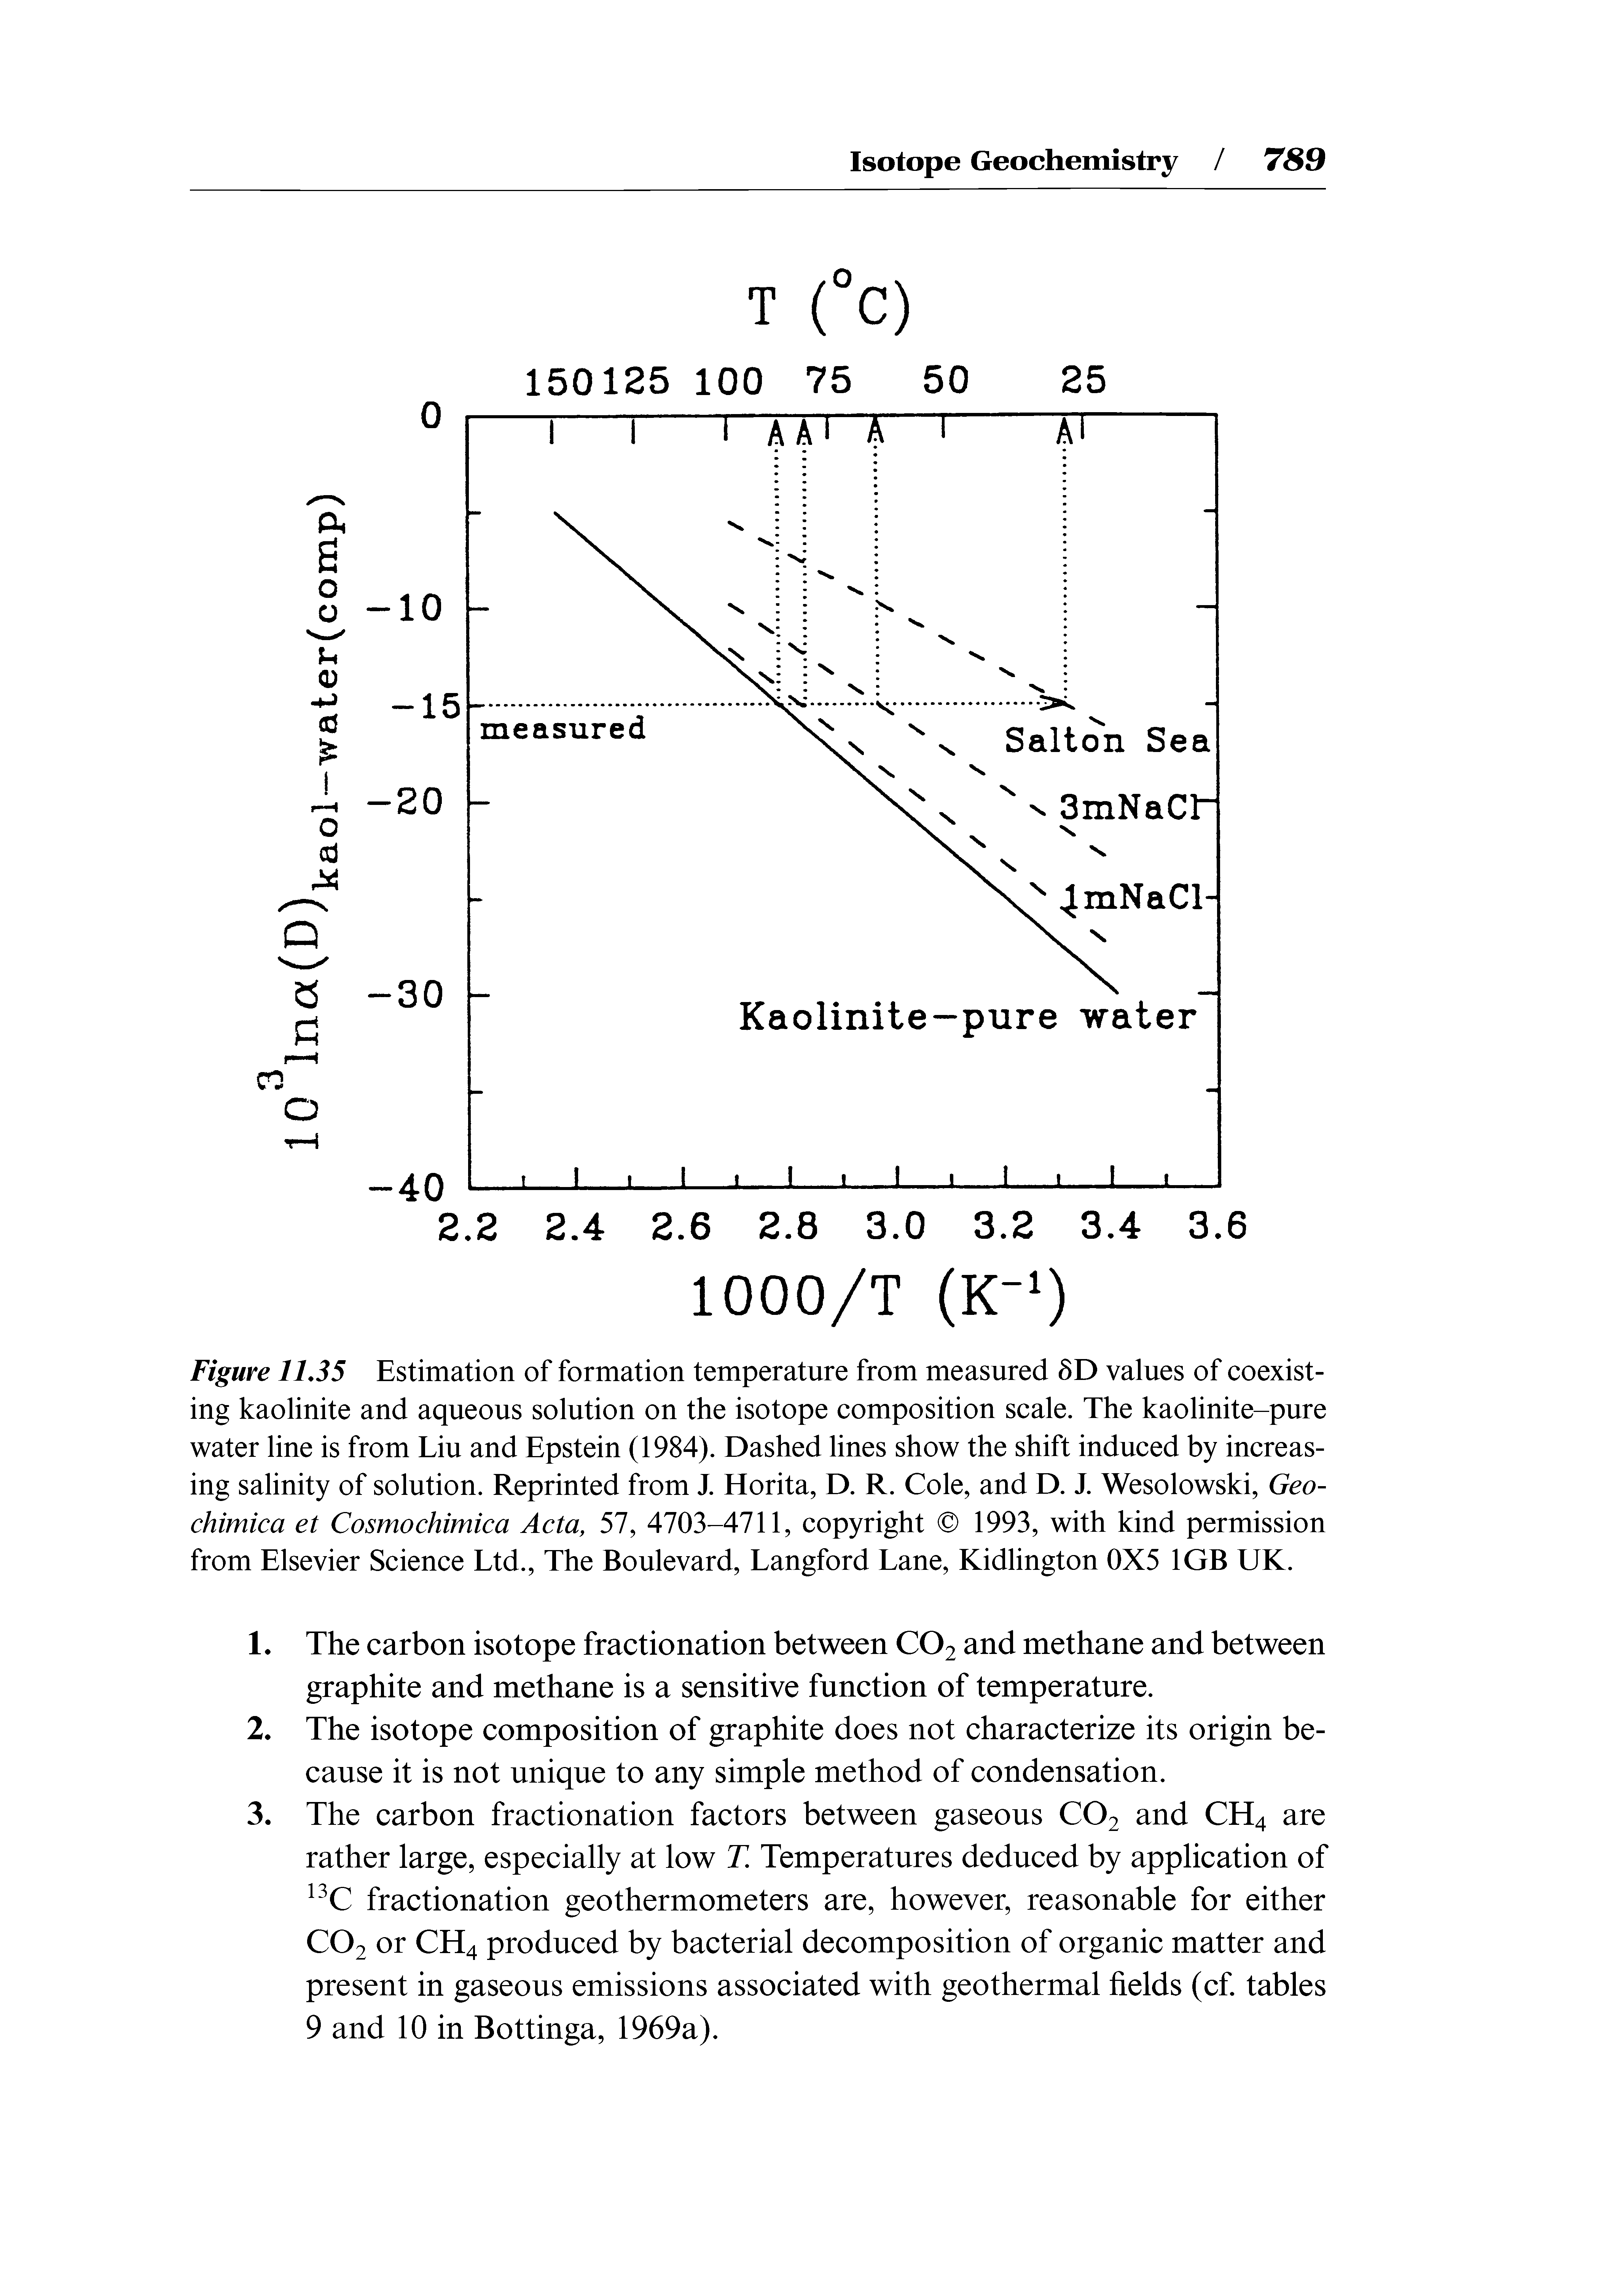 Figure 1135 Estimation of formation temperature from measured 8D values of coexisting kaolinite and aqueous solution on the isotope composition scale. The kaolinite-pure water line is from Liu and Epstein (1984). Dashed lines show the shift induced by increasing salinity of solution. Reprinted from J. Horita, D. R. Cole, and D. J. Wesolowski, Geo-chimica et Cosmochimica Acta, 57, 4703-4711, copyright 1993, with kind permission from Elsevier Science Ltd., The Boulevard, Langford Lane, Kidlington 0X5 1GB UK.